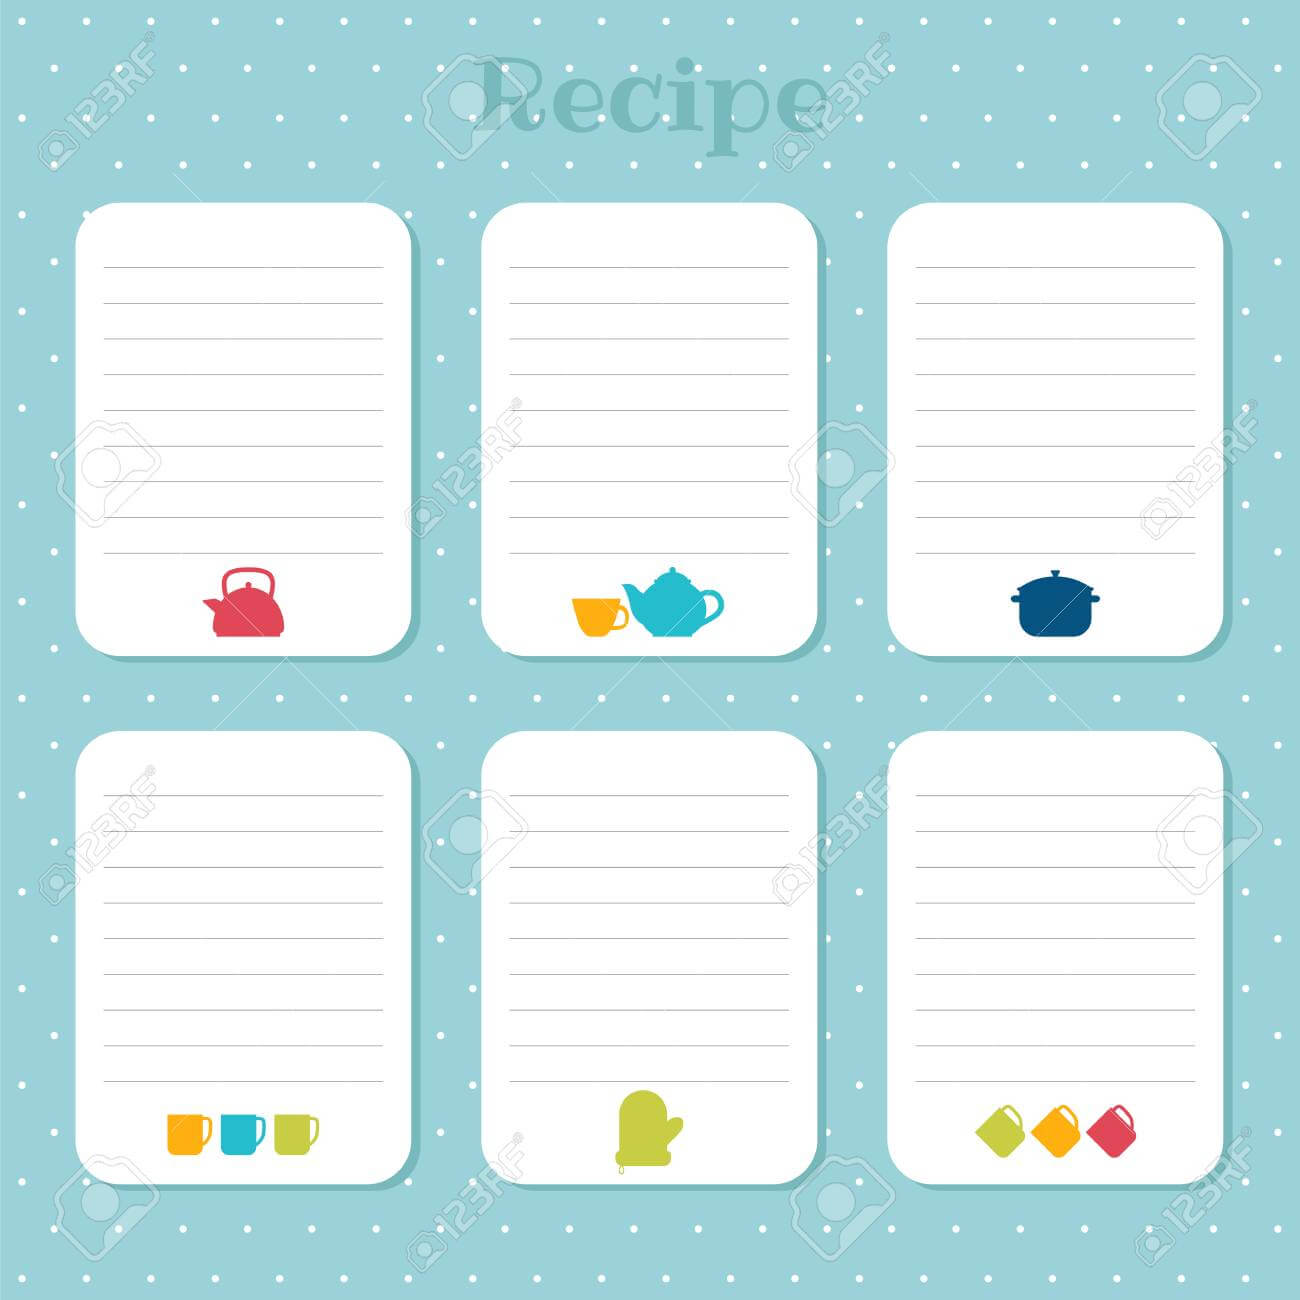 Recipe Cards Set. Cooking Card Templates. For Restaurant, Cafe,.. Pertaining To Restaurant Recipe Card Template